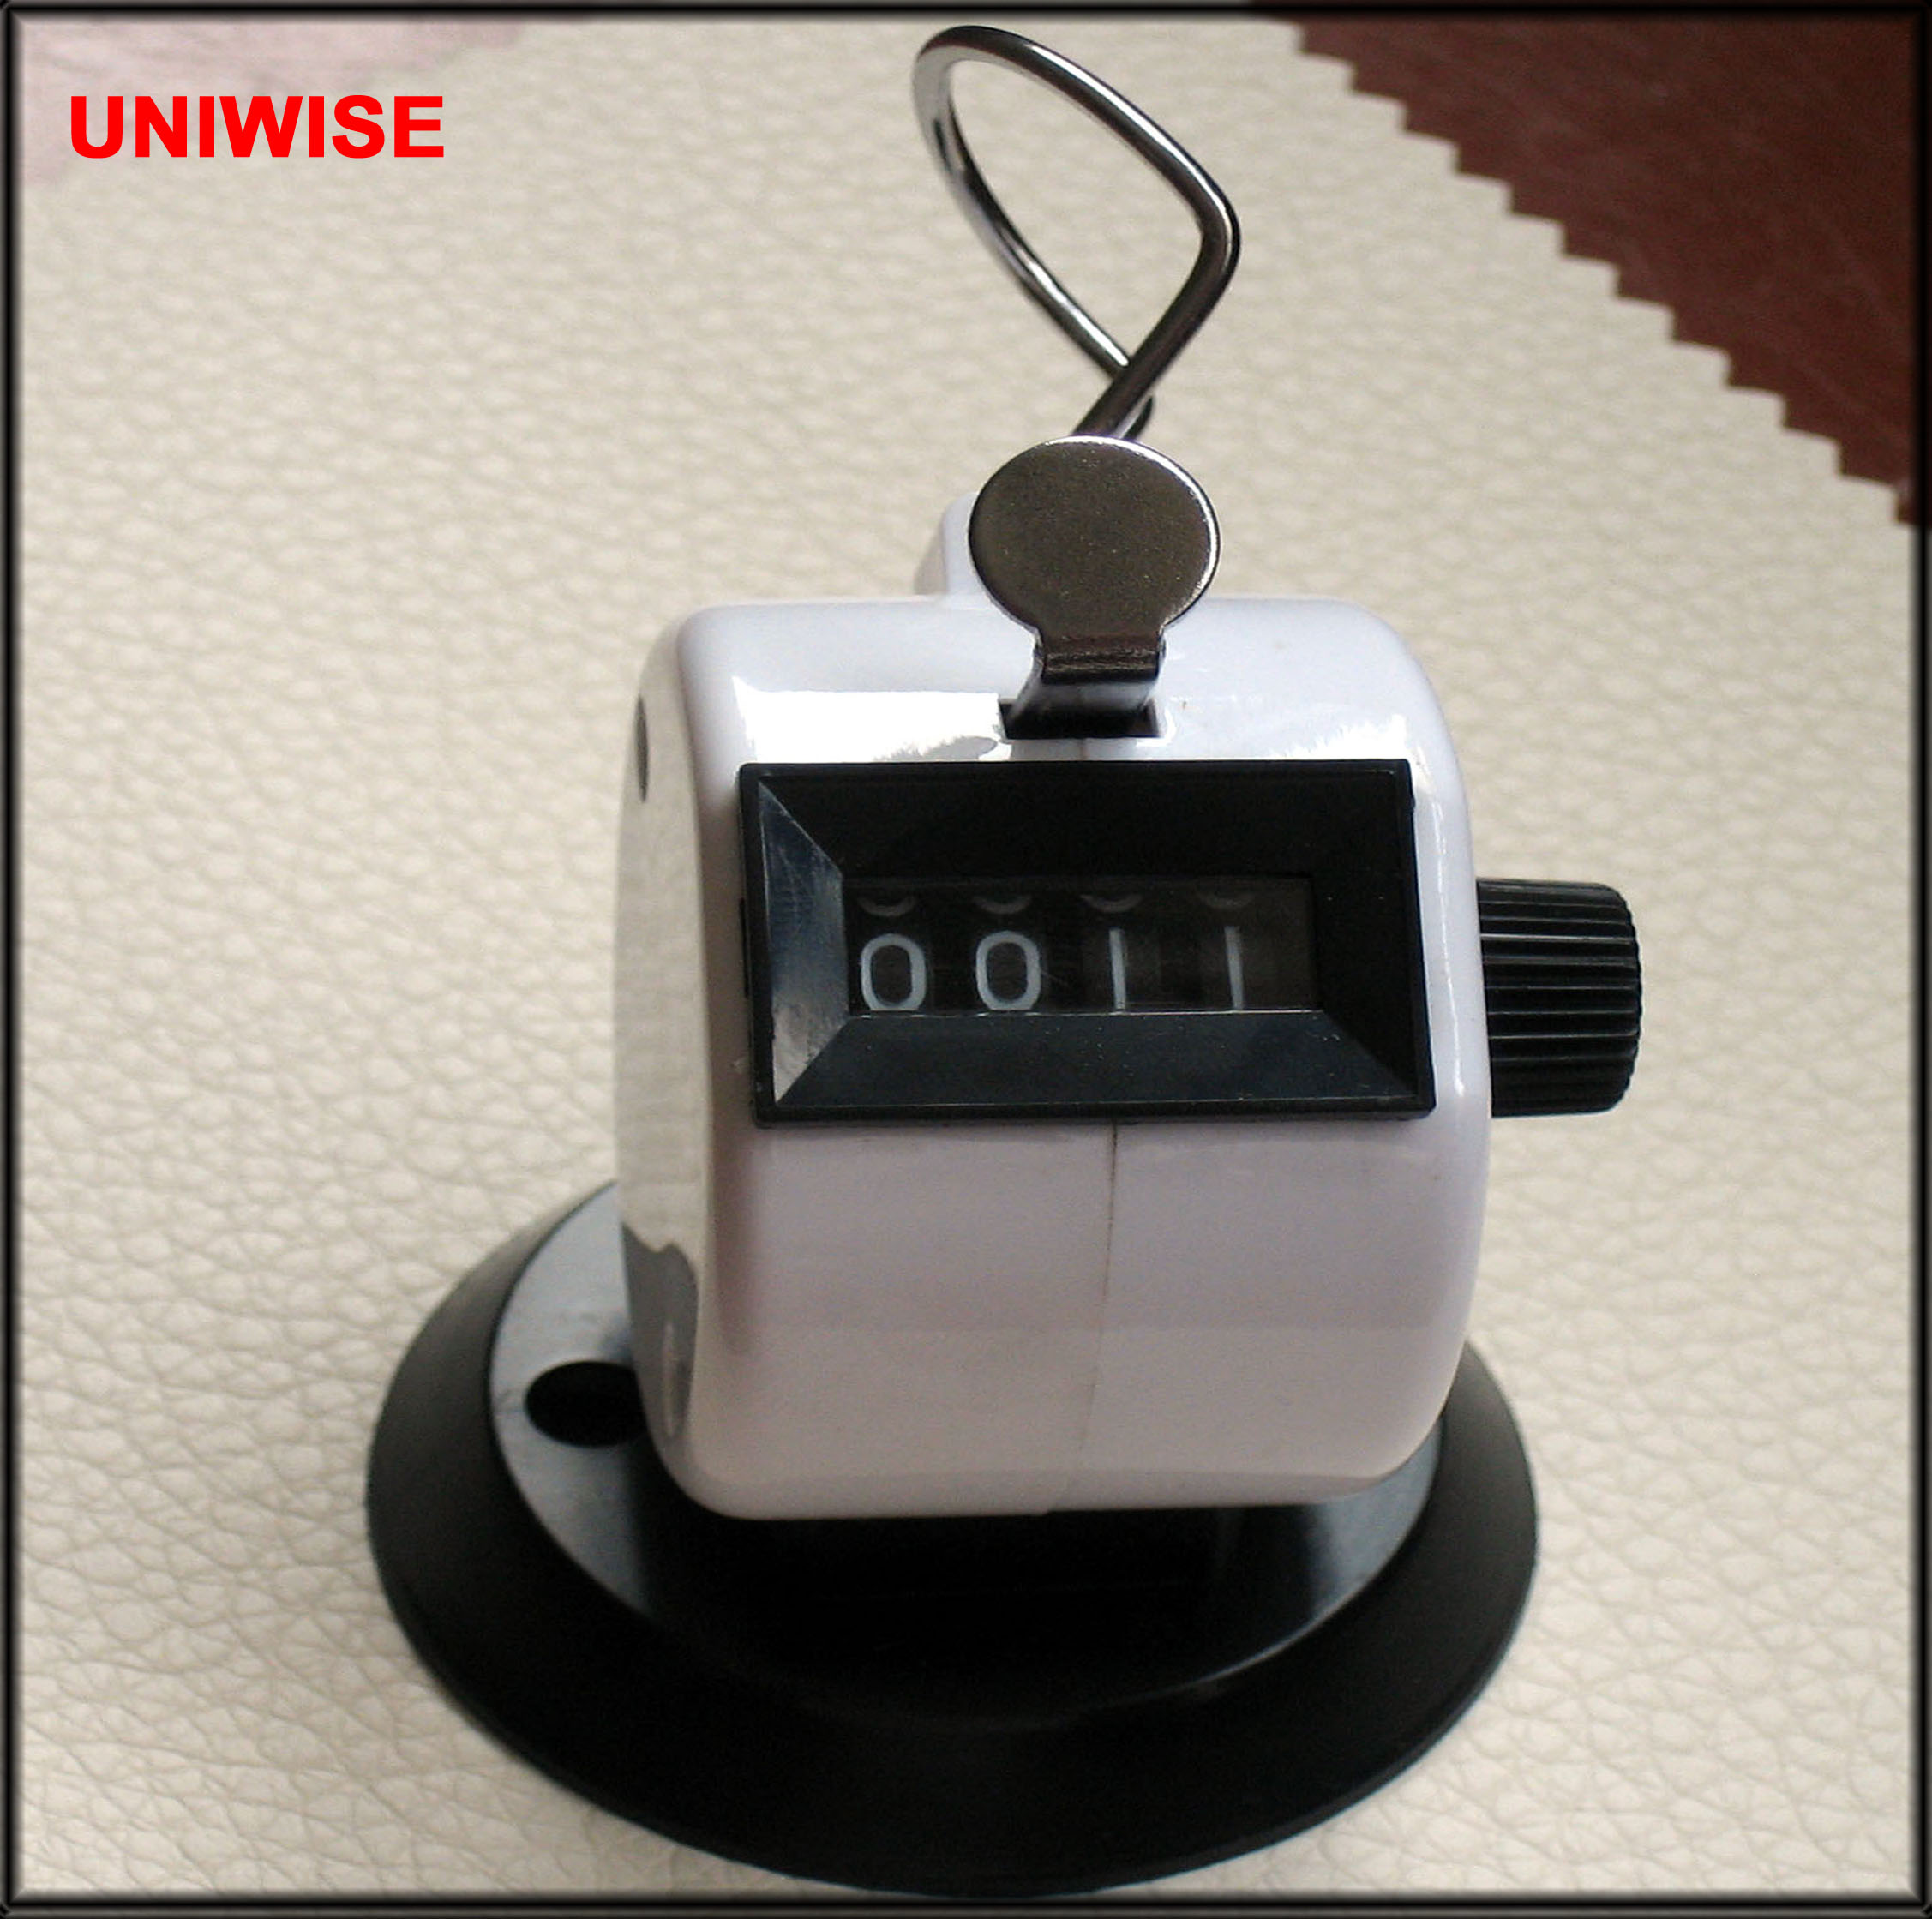 UIC 1200 White High quality 4 digit counter